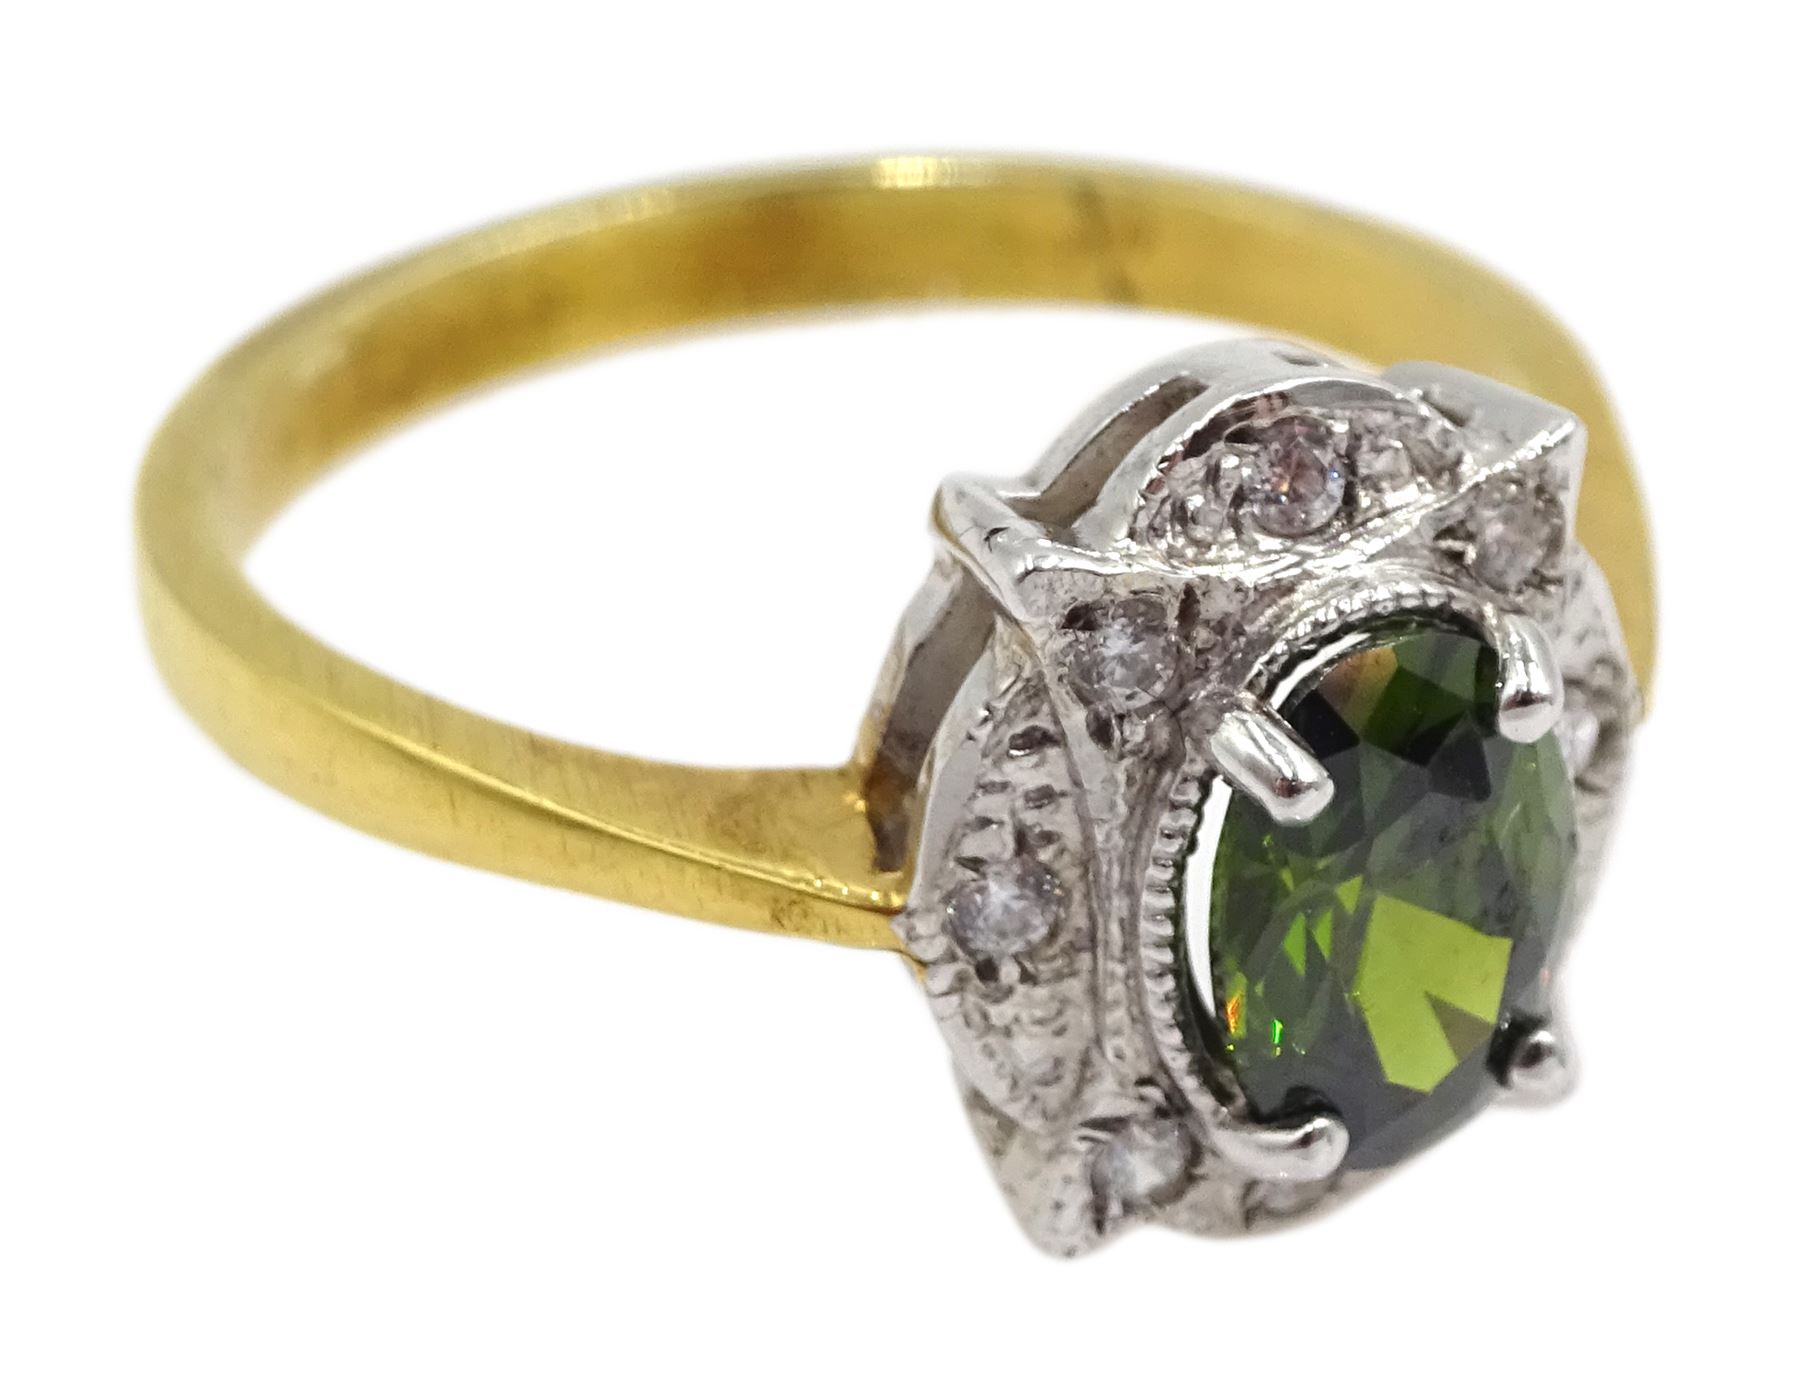 Silver-gilt peridot and cubic zirconia ring - Image 3 of 4